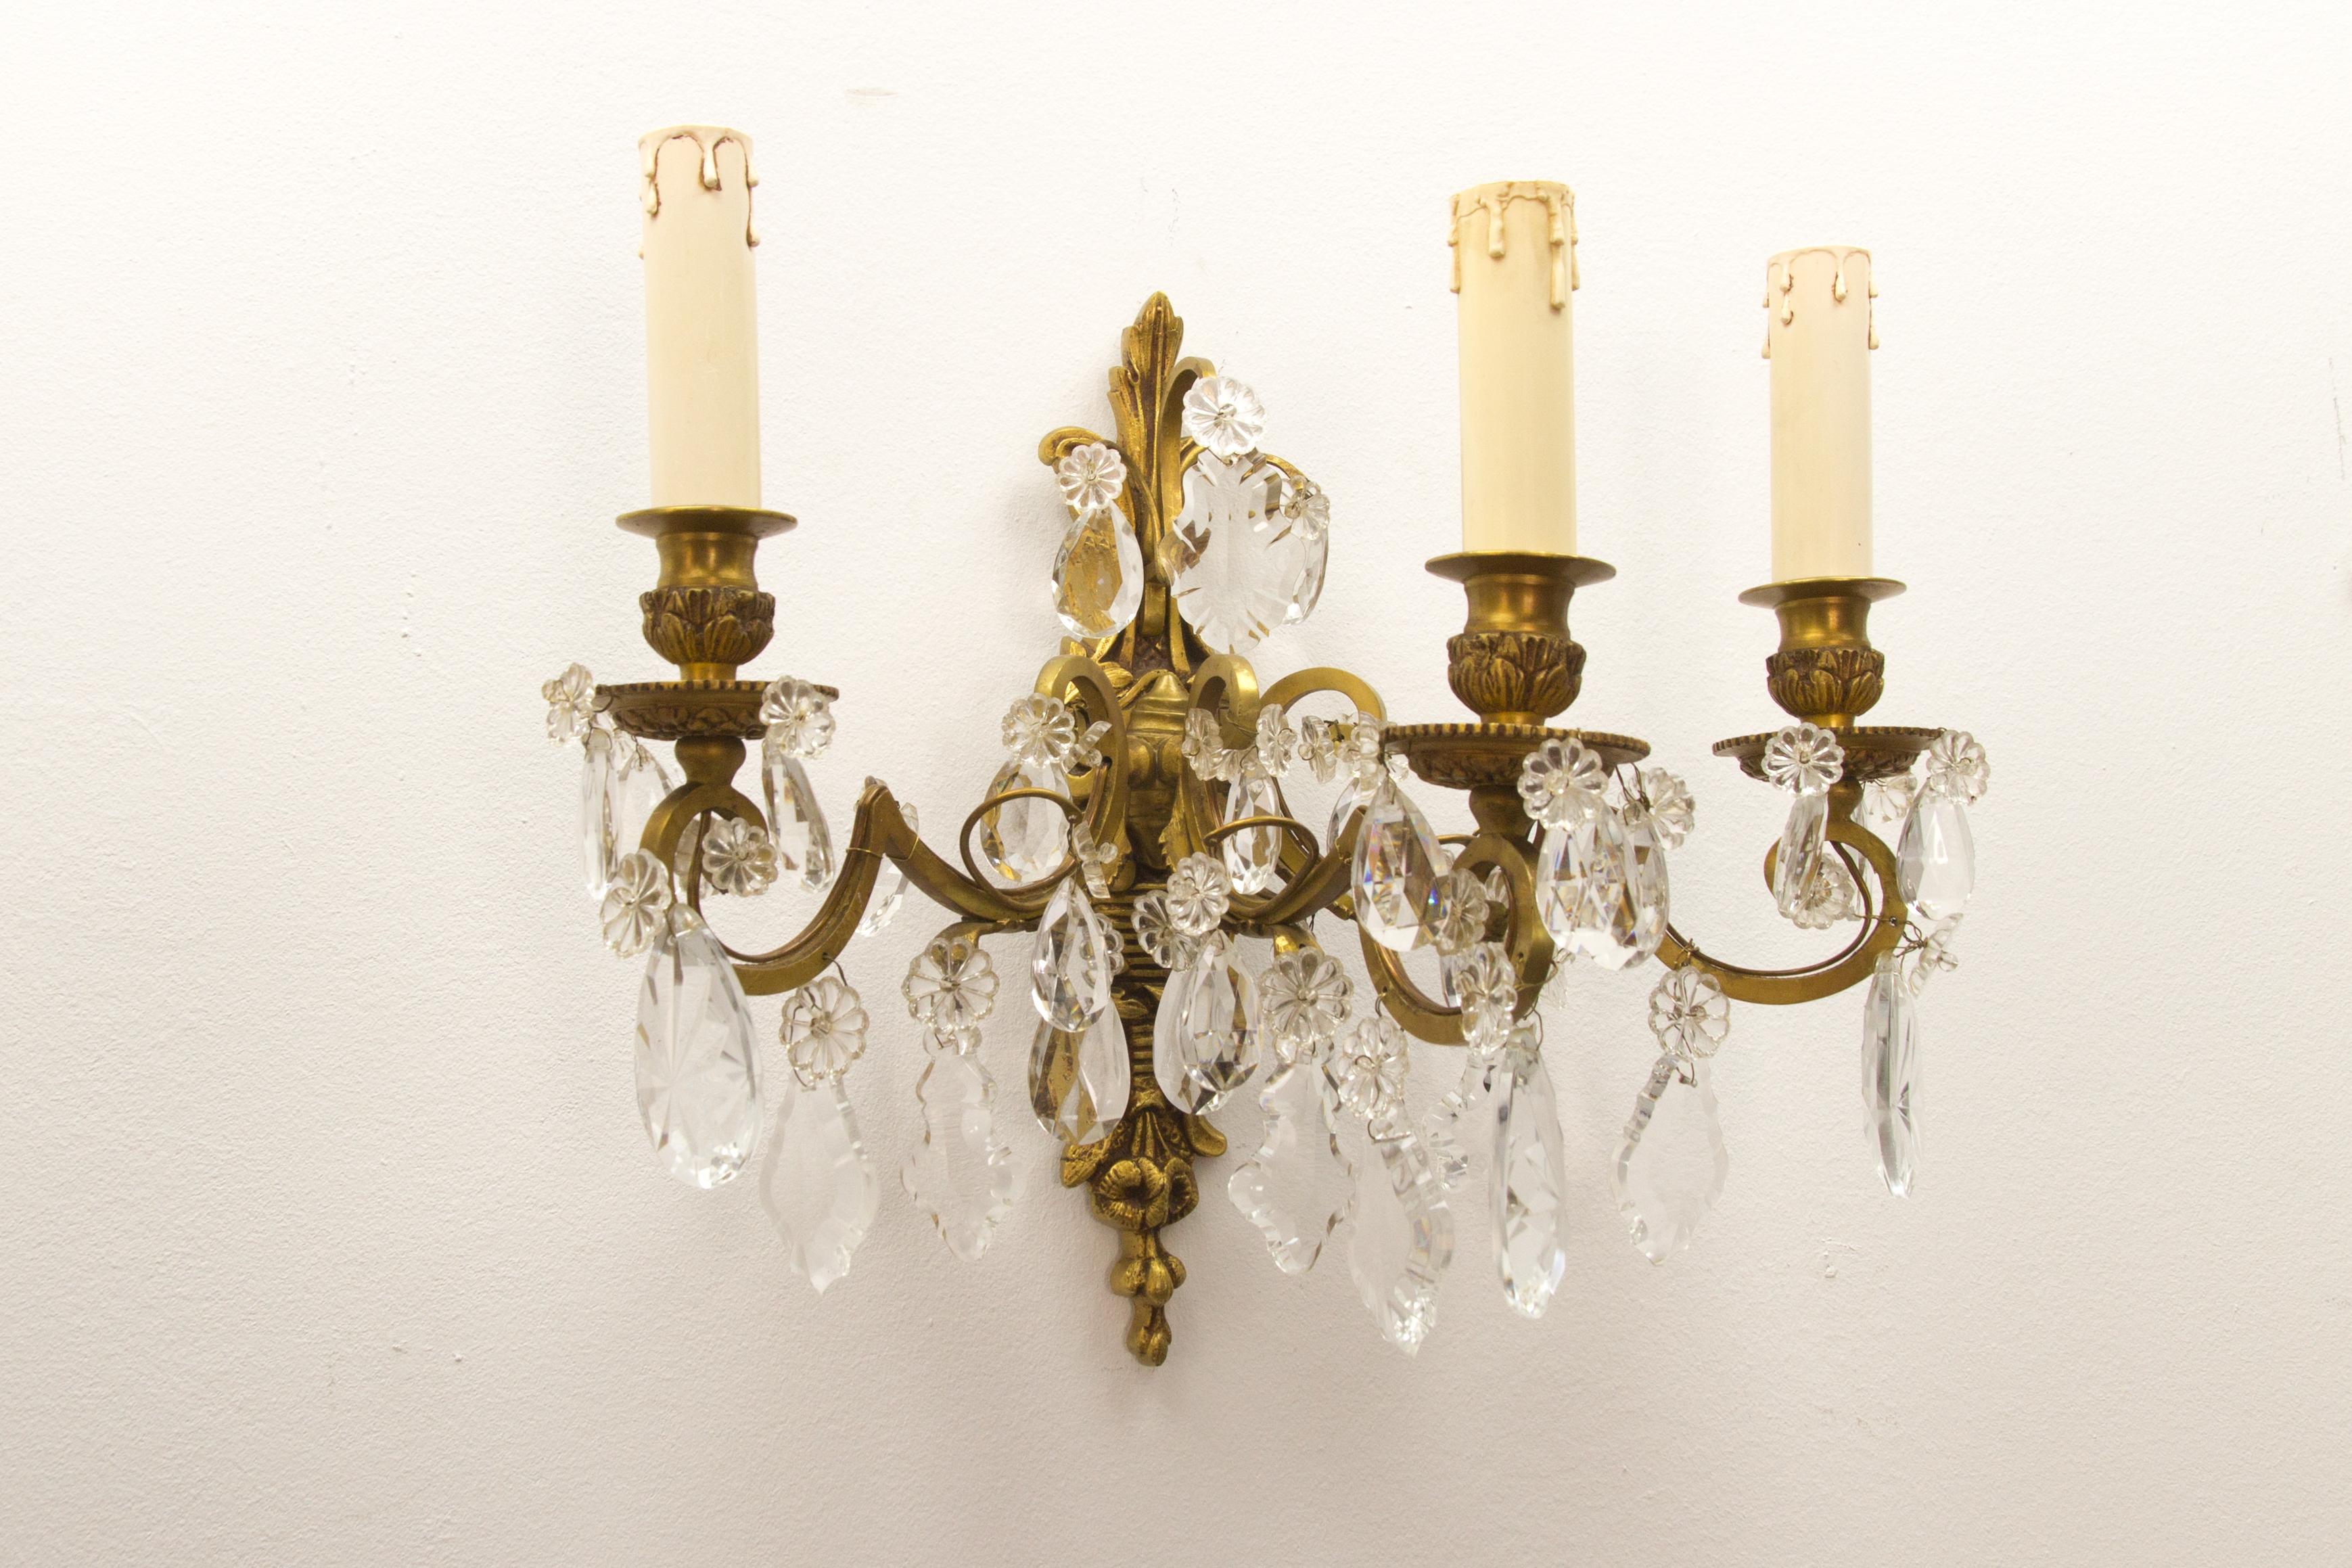 Exquisite French Louis XVI style late 19th-century three-light wall sconce. Originally crafted for 3 candles, this antique wall applique has been electrified. Made of bronze with foliate and floral motifs and decorated with multifaceted and shaped